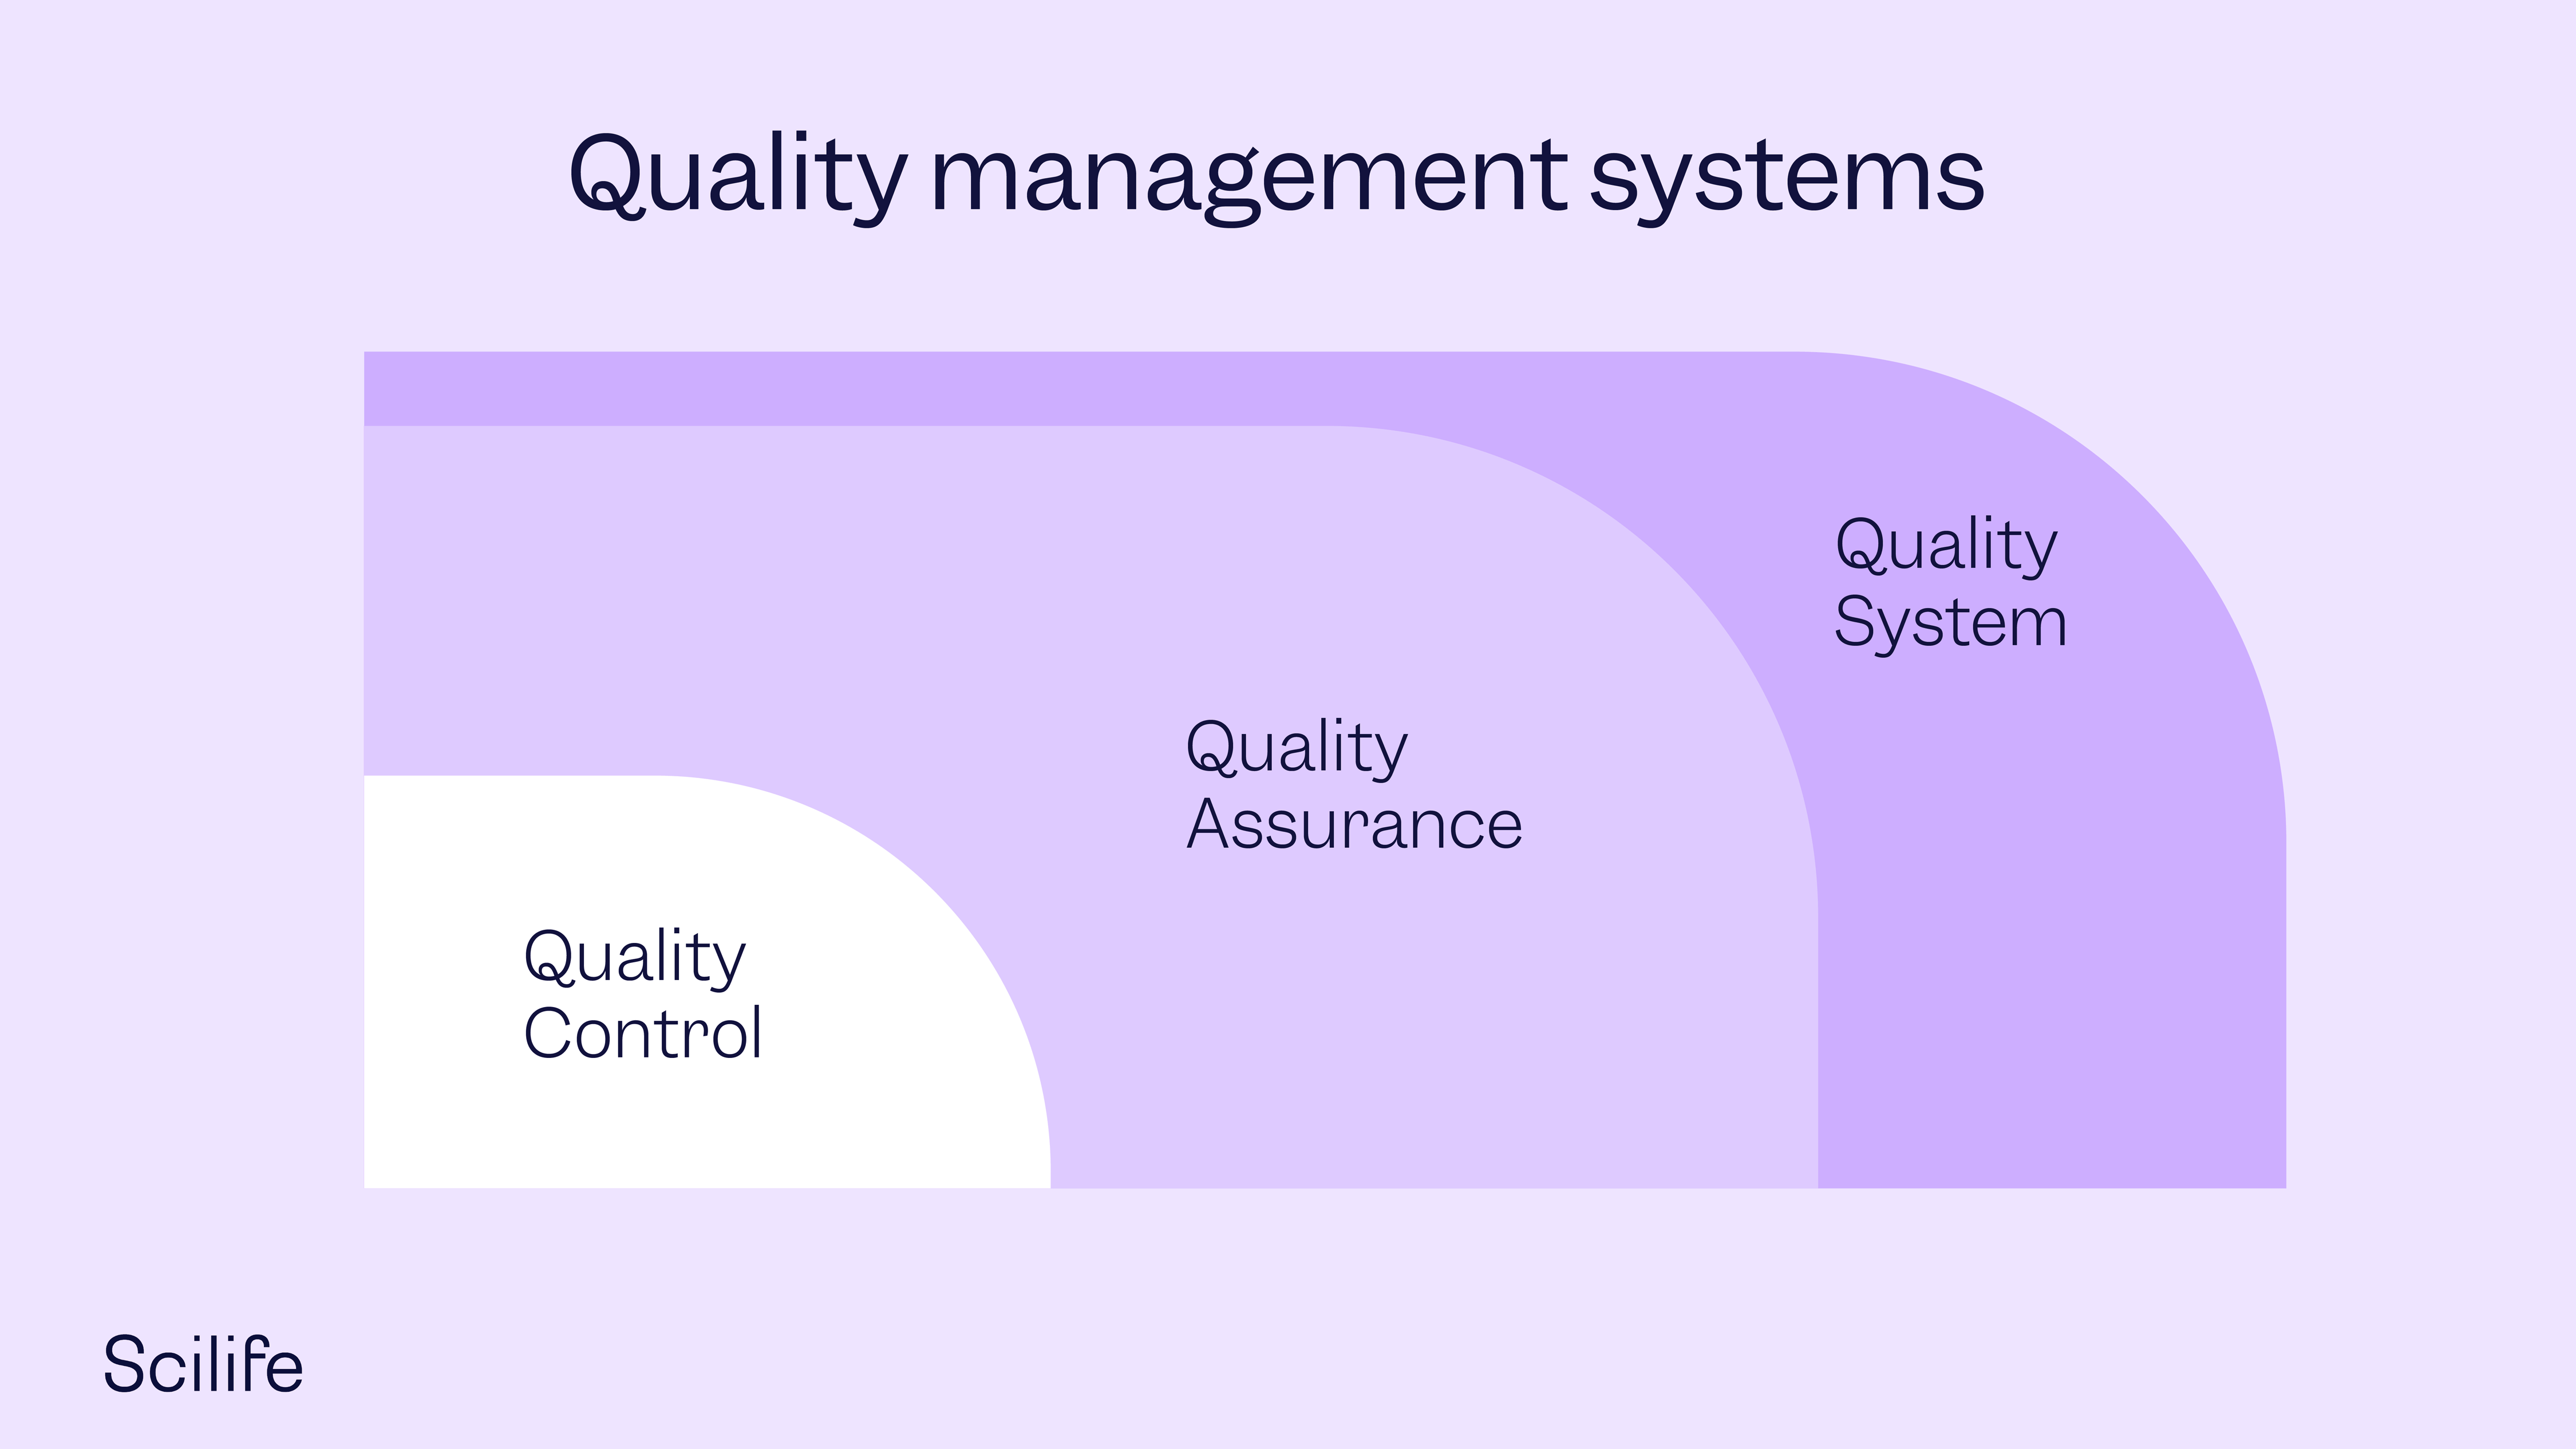 Illustration that represents the quality management systems (QMS) by Scilife.